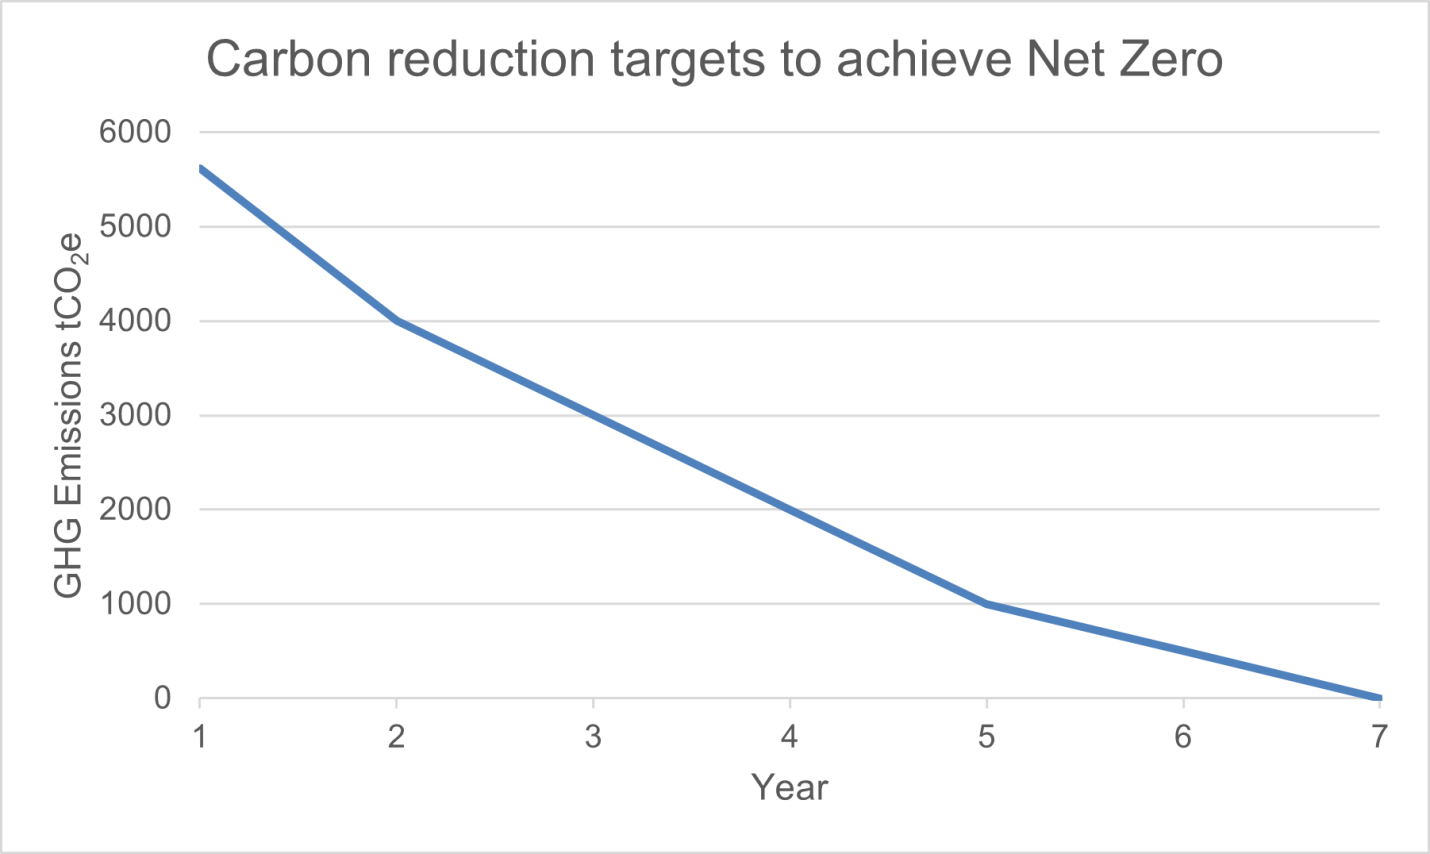 Graph showing the Carbon Reduction targets to achieve Net Zero